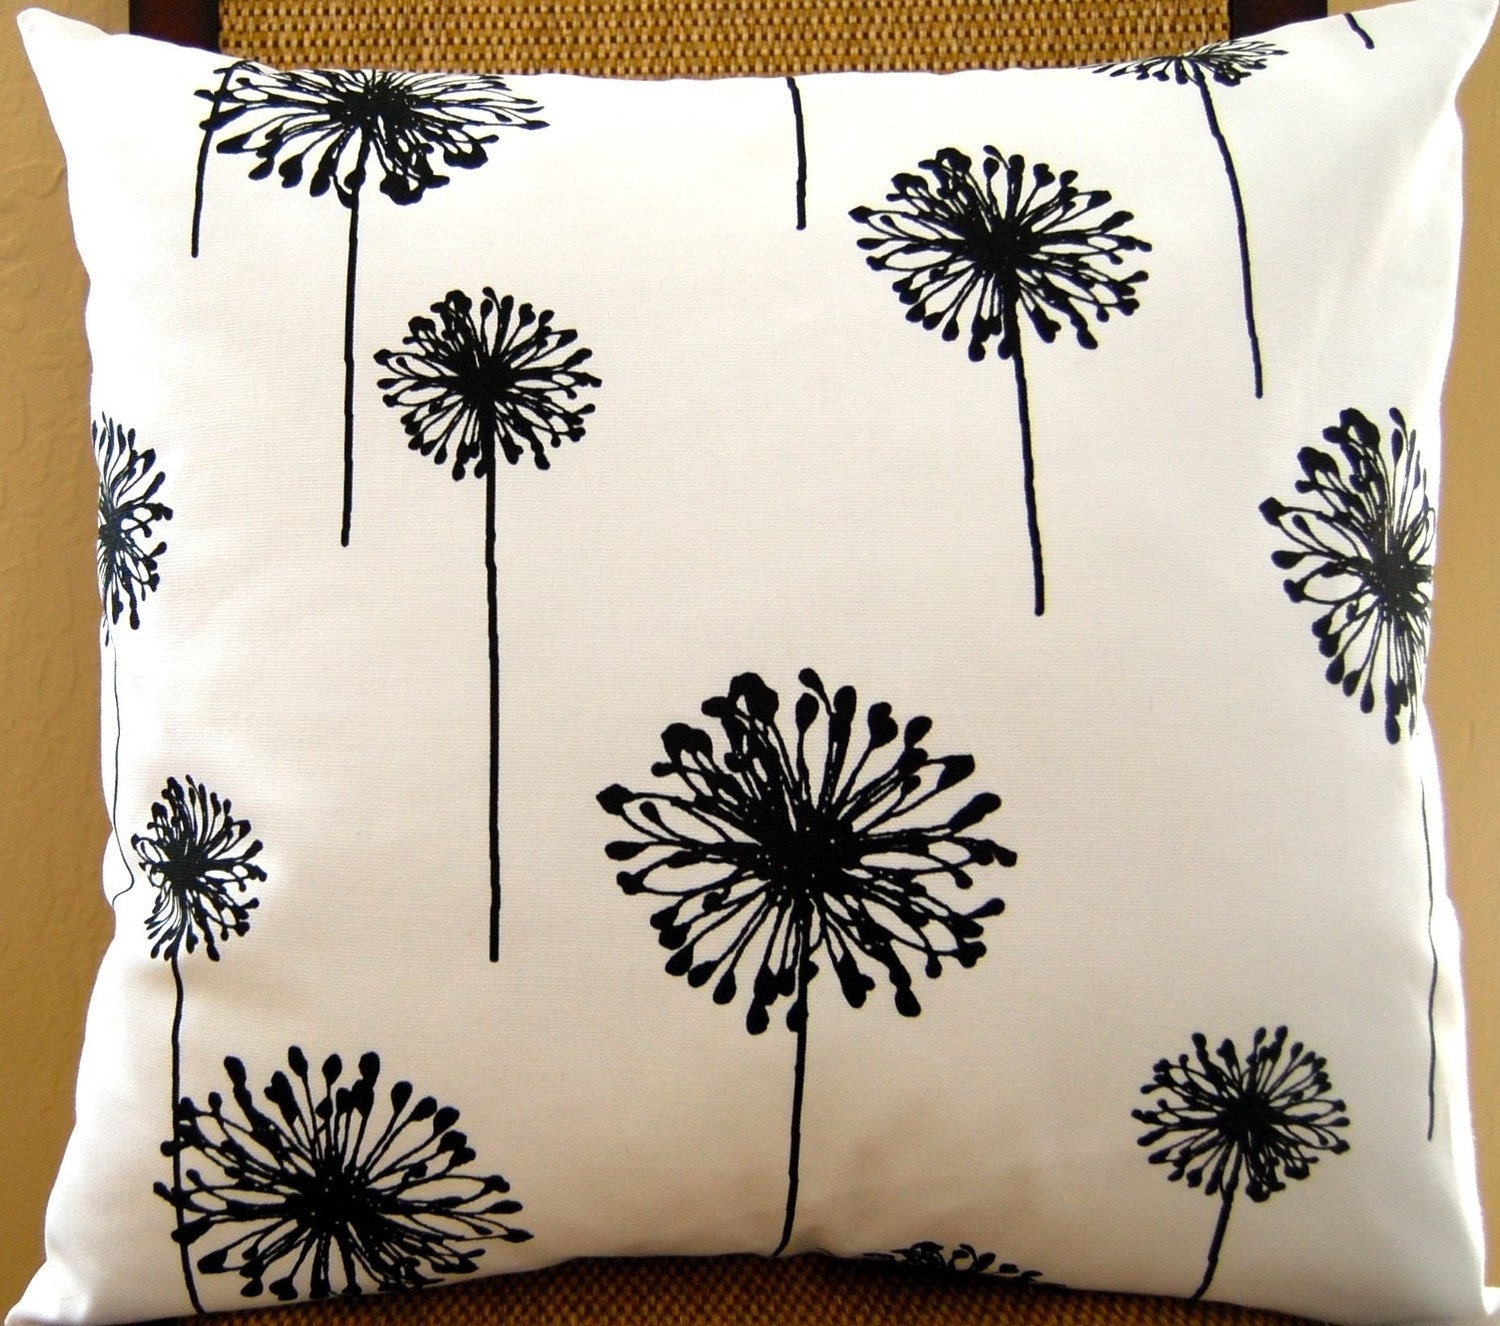 SPECIAL BUY - Pair of Decorative Toss Pillow Covers - Ready to Ship - 20 Inches - Black Dandelions